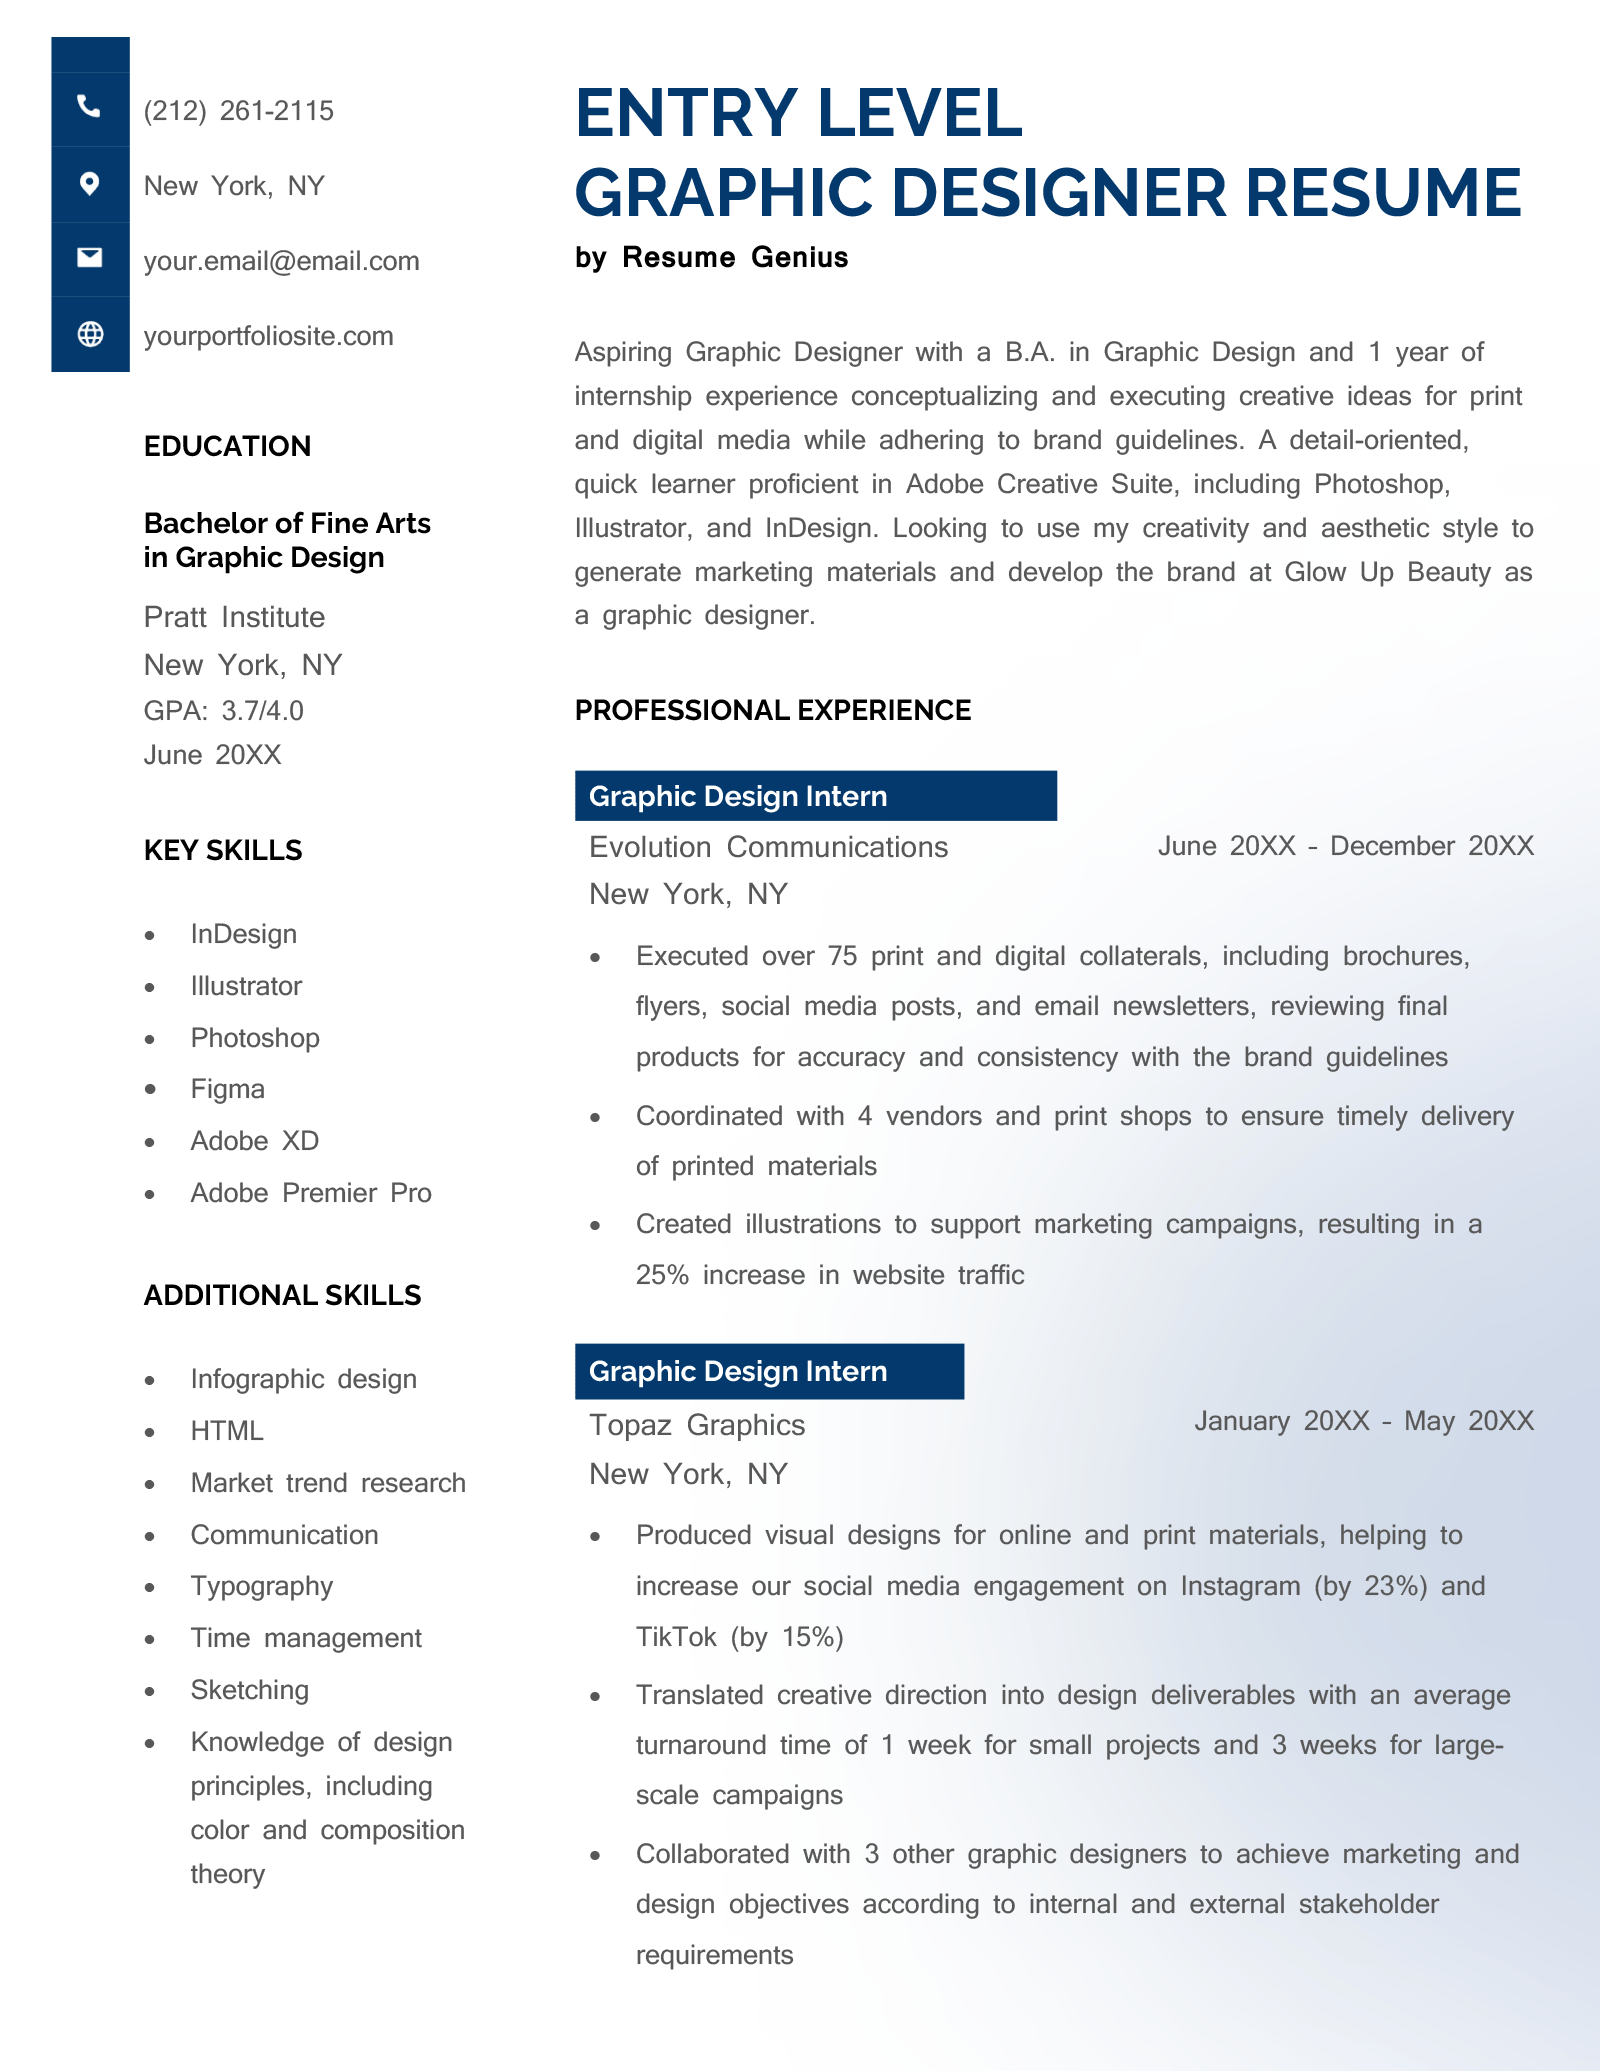 Resume template example for an entry-level graphic designer